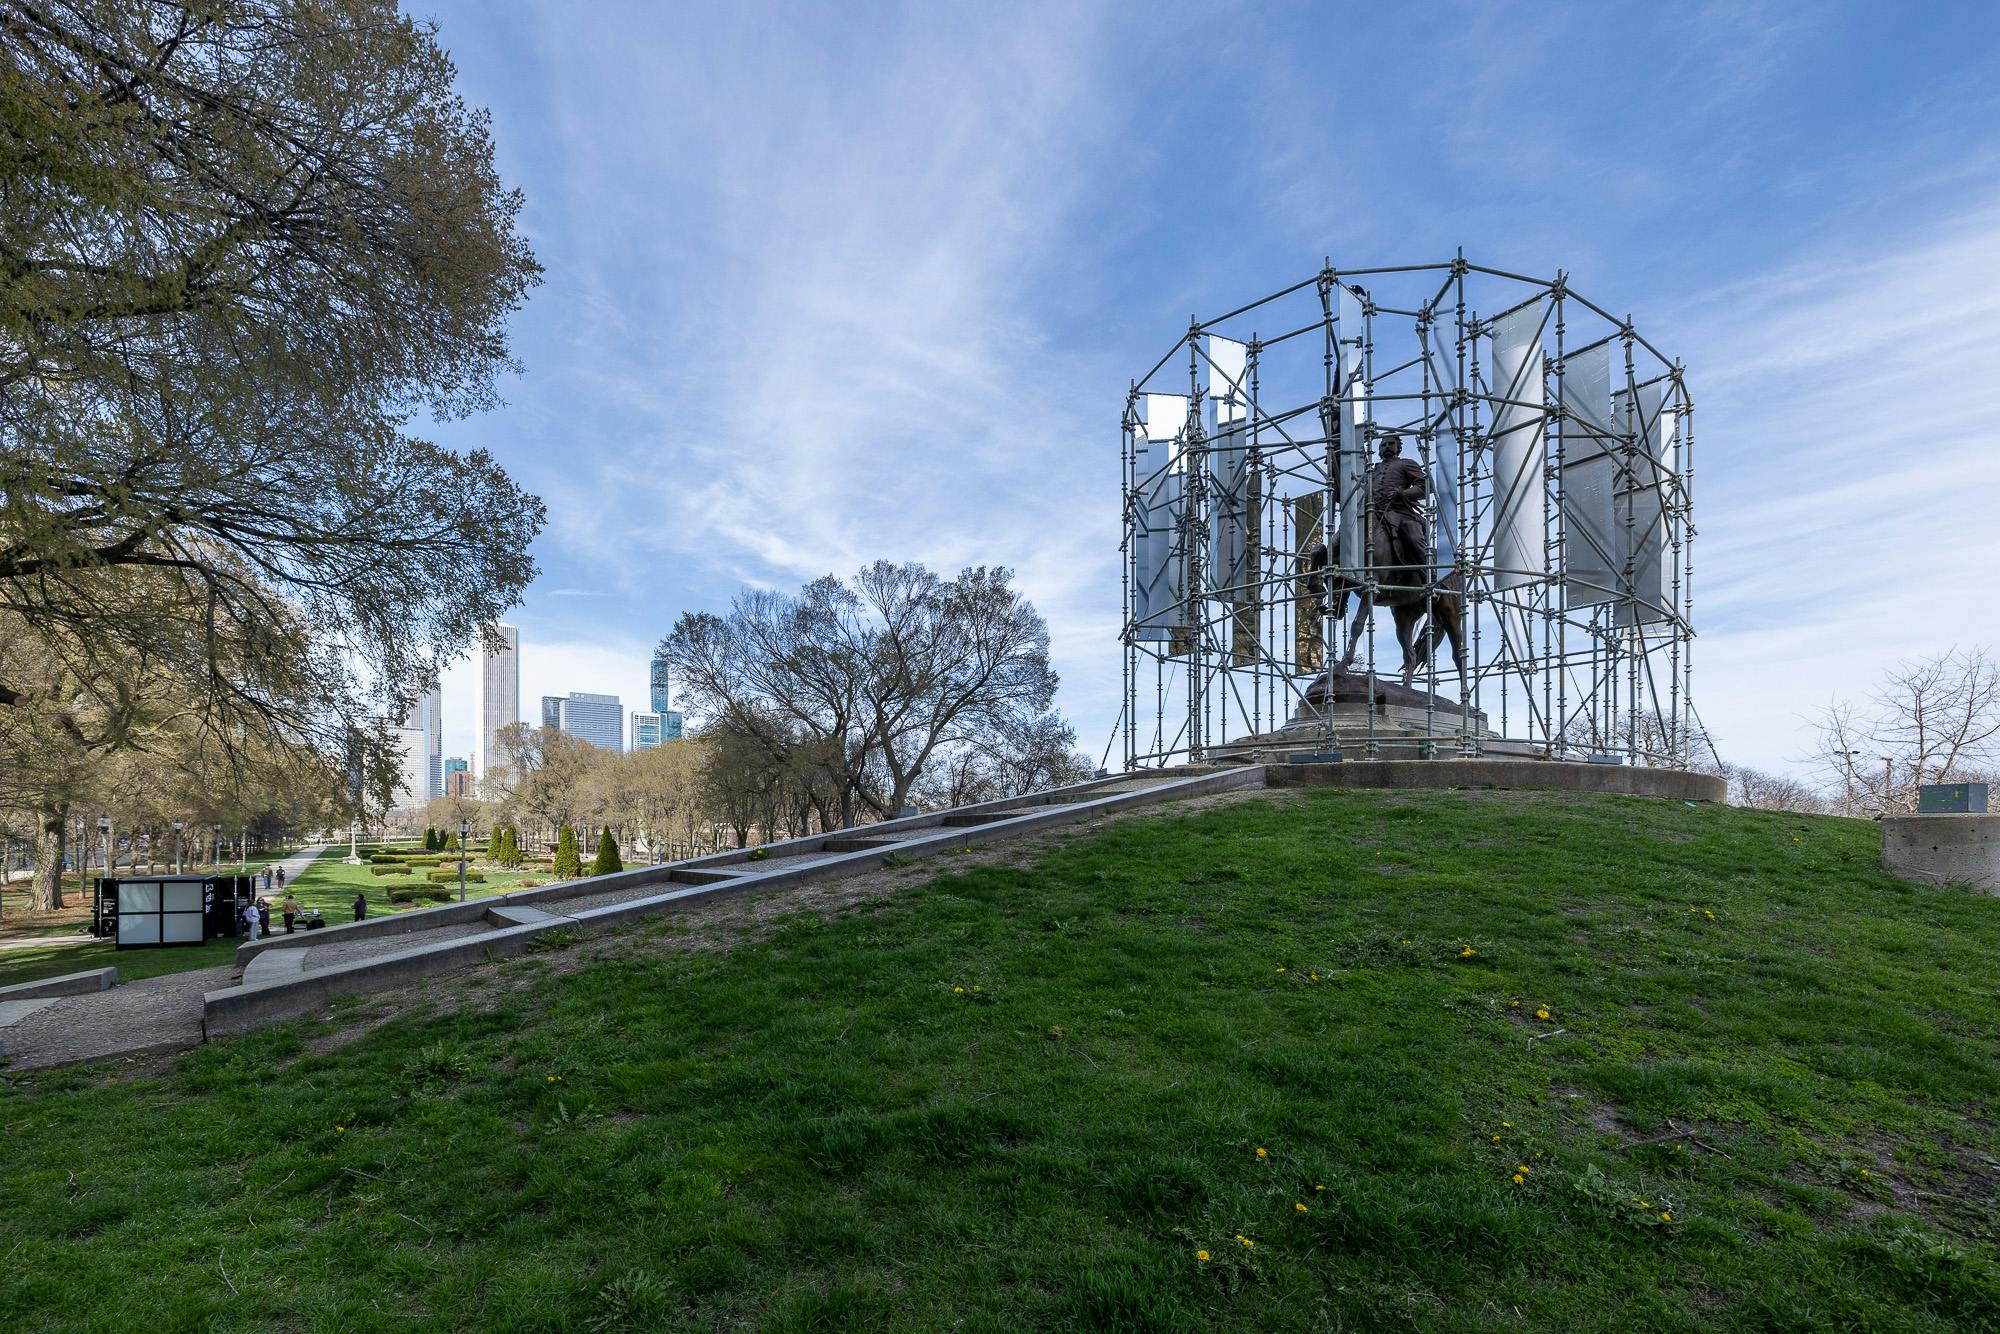 Brendan Fernandes, New Monuments | Chicago, 2024. General John Alexander Logan Monument, Grant Park, Chicago, IL. Presented by Black Cube Nomadic Art Museum in association with the Chicago Park District, as part of EXPO CHICAGO’s IN/SITU Outside program. Architectural Intervention by AIM Architecture. Courtesy the artist and Black Cube Nomadic Art Museum. Photo: Matthew Reeves Photography.